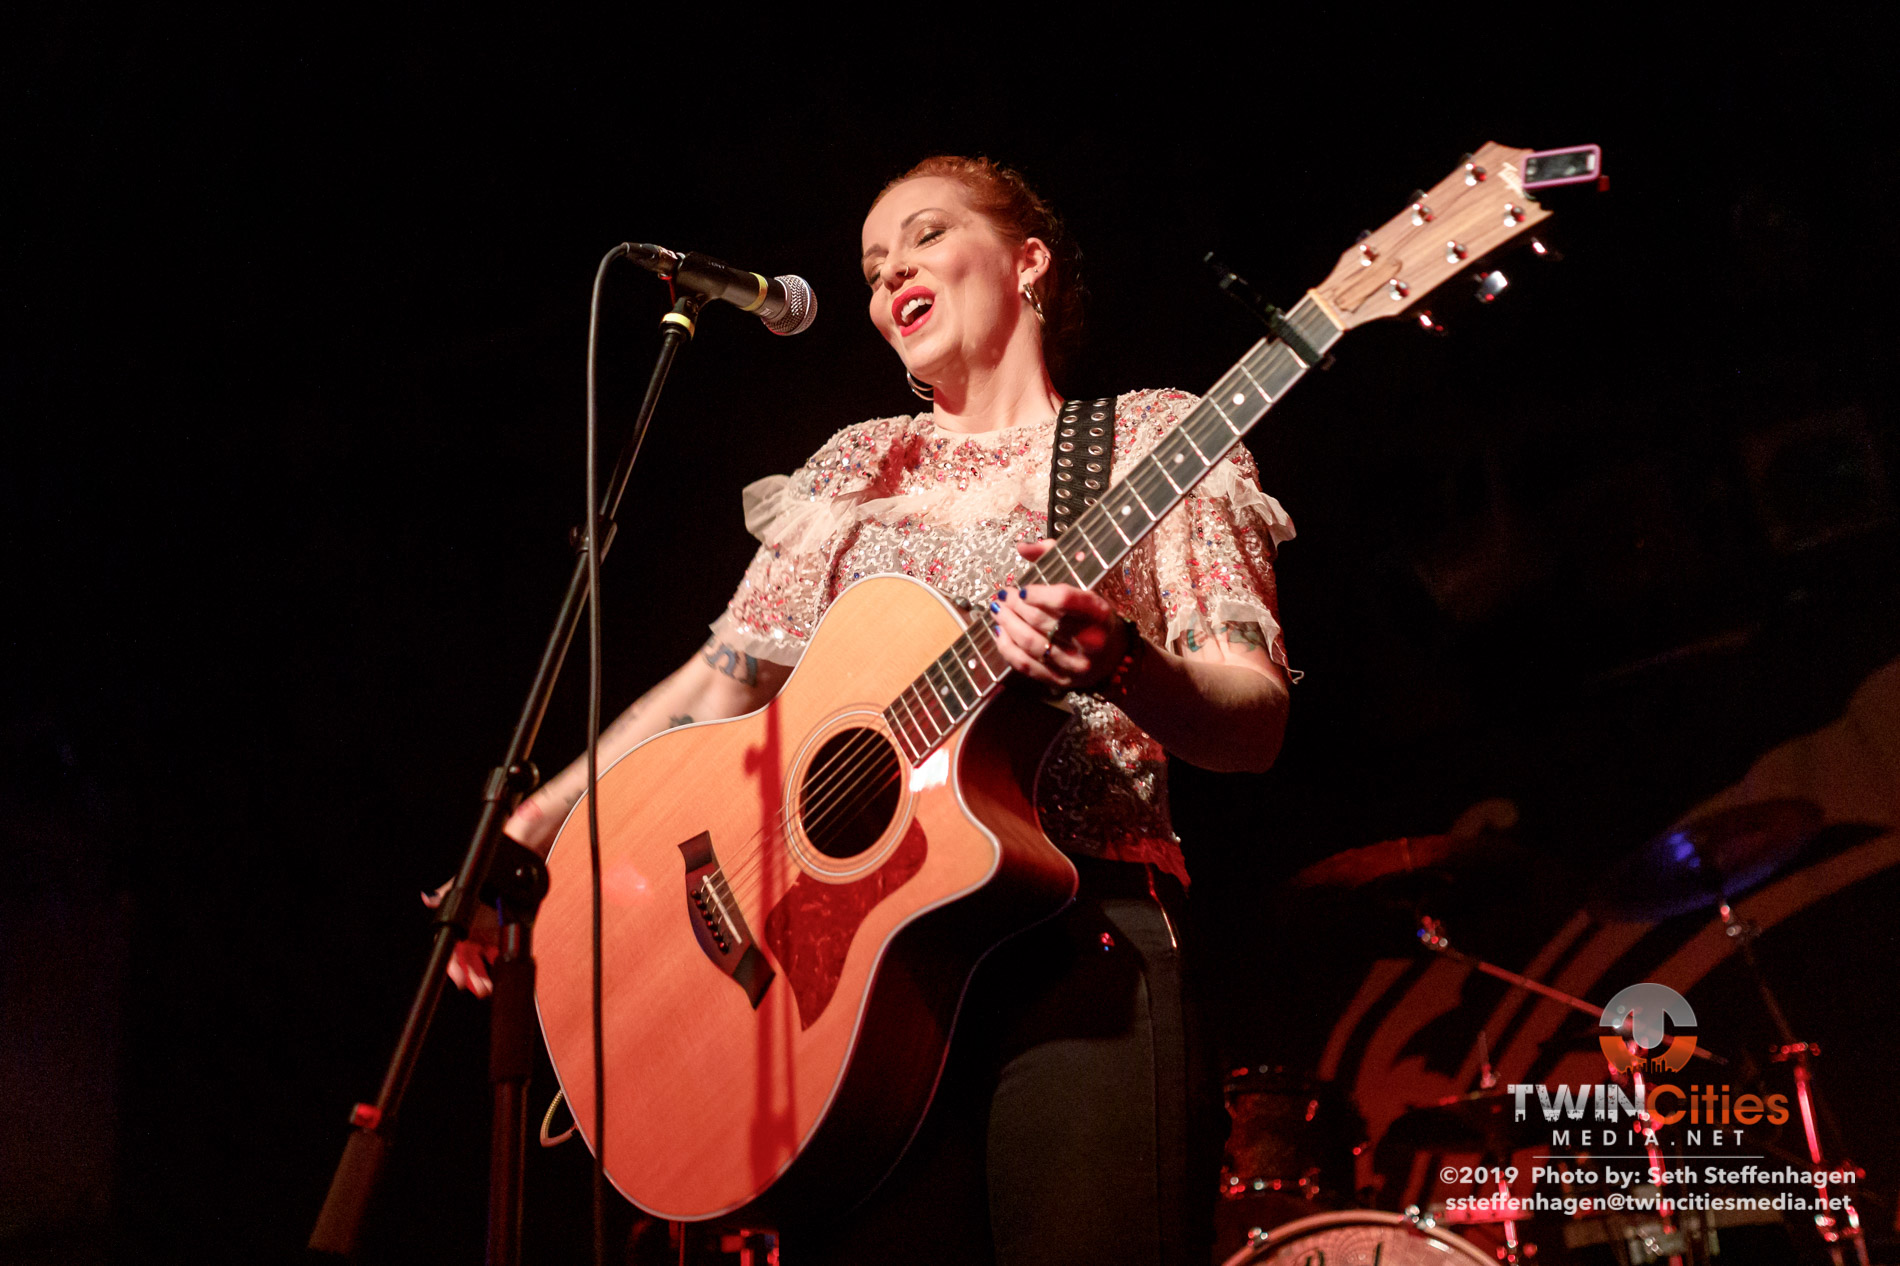 September 30, 2019 - Minneapolis, Minnesota, United States -  Anneke Van Giersbergen live in concert at The Cabooze opening for Delain and Amorphis.

(Photo by Seth Steffenhagen/Steffenhagen Photography)